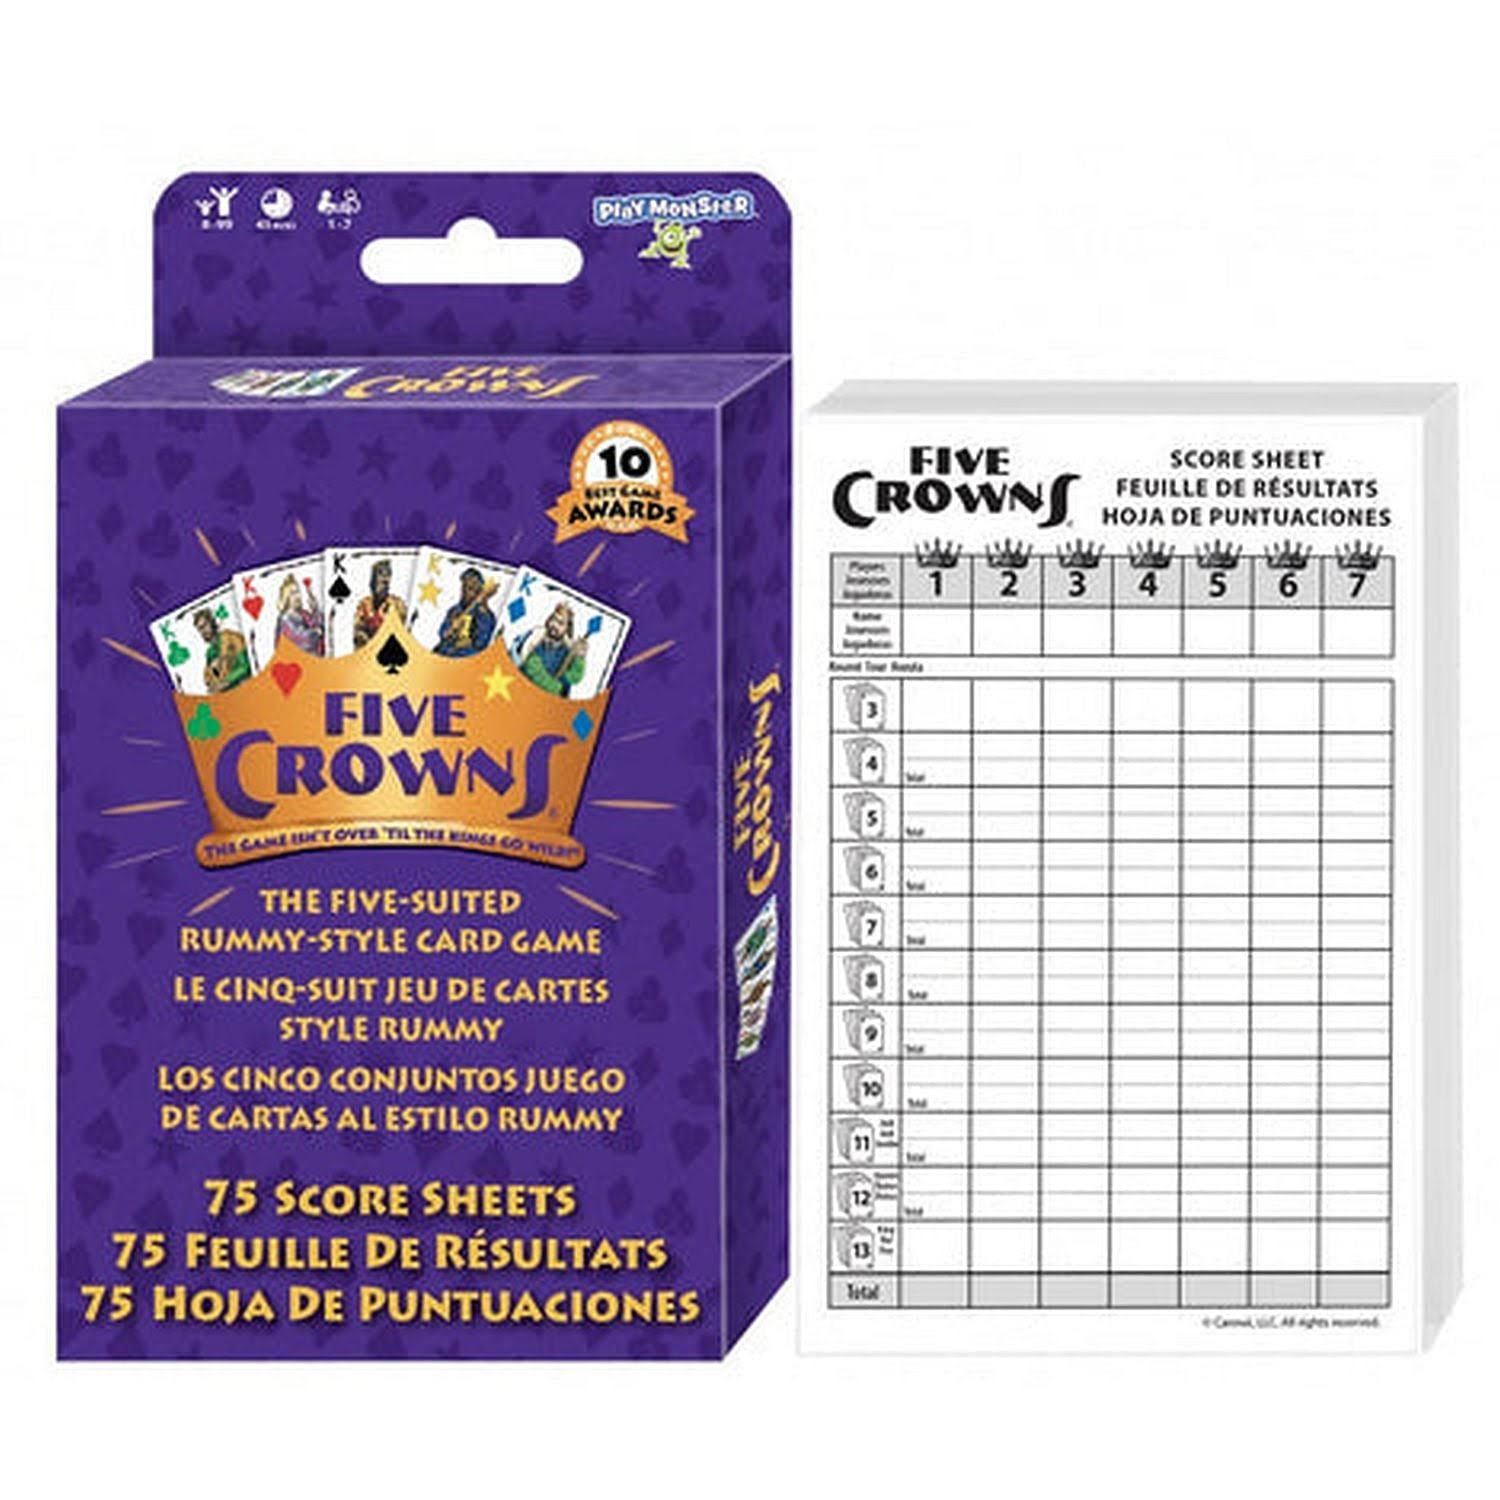 PLAY MONSTER - Five Crowns Score Sheets